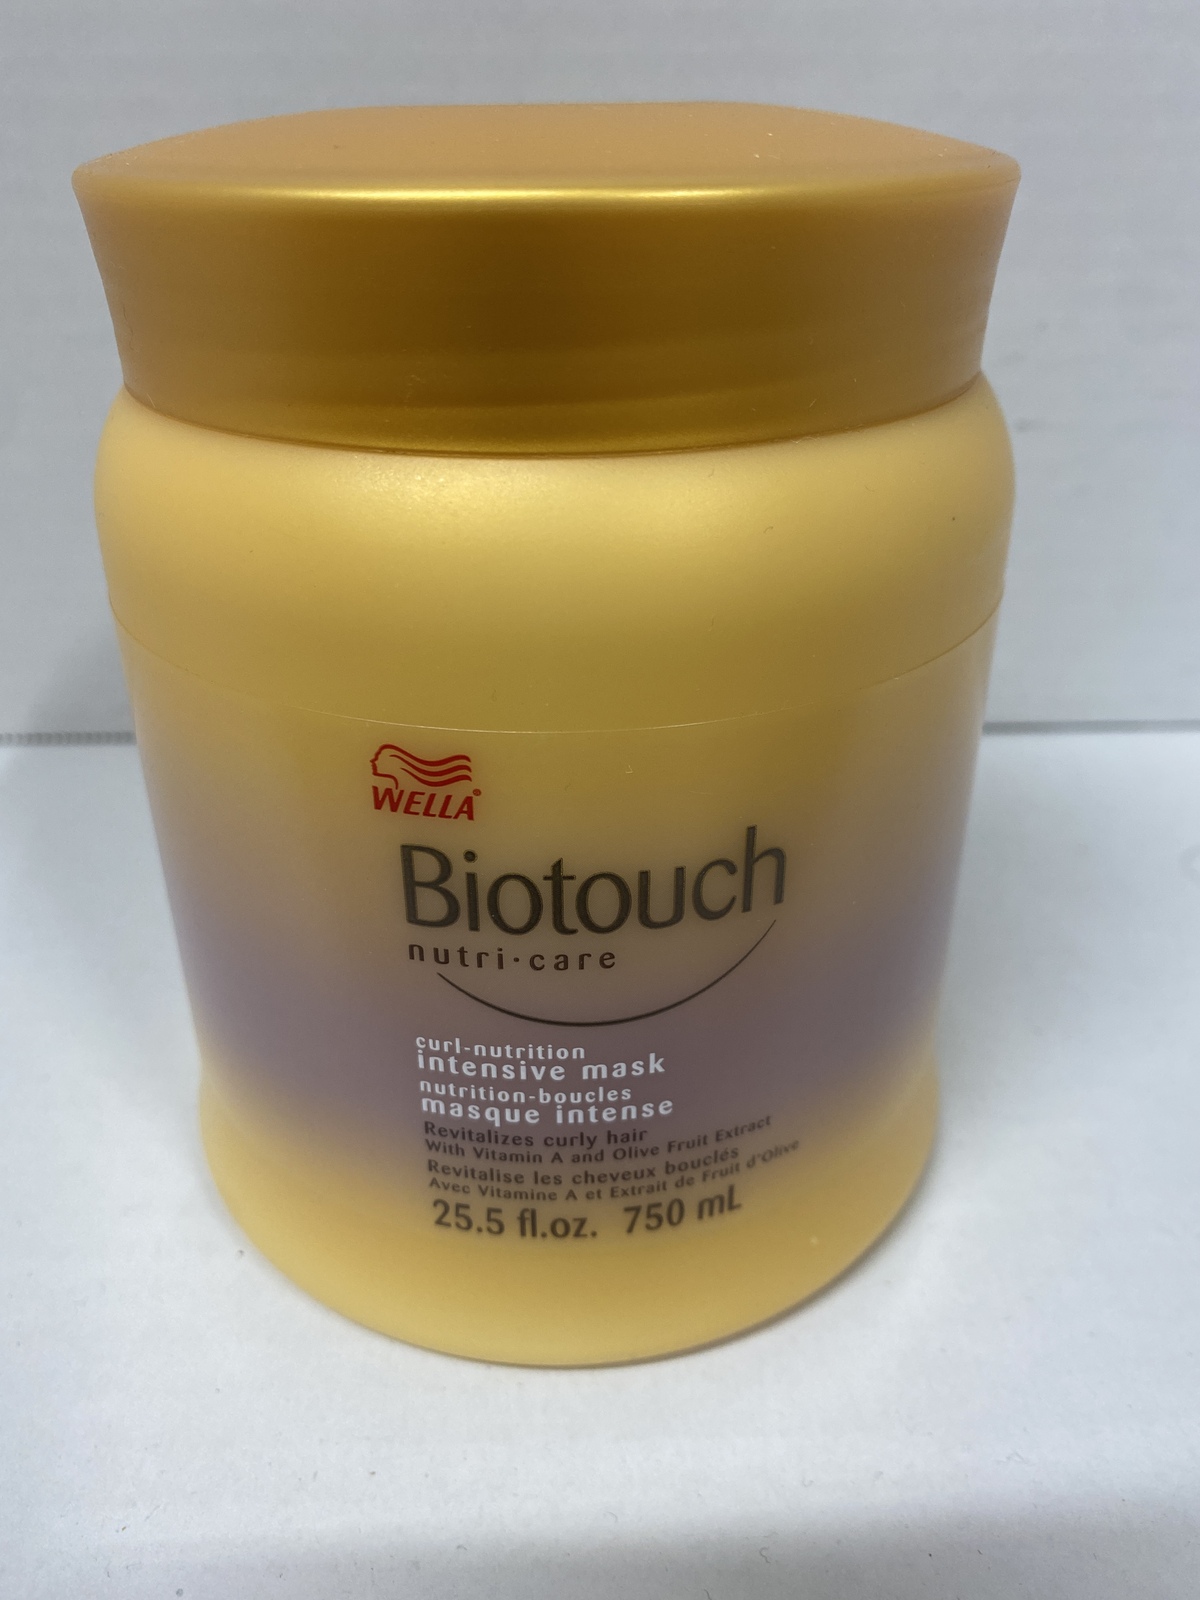 Wella Biotouch Curl Nutrition Intensive Mask 25.5 oz - $69.99